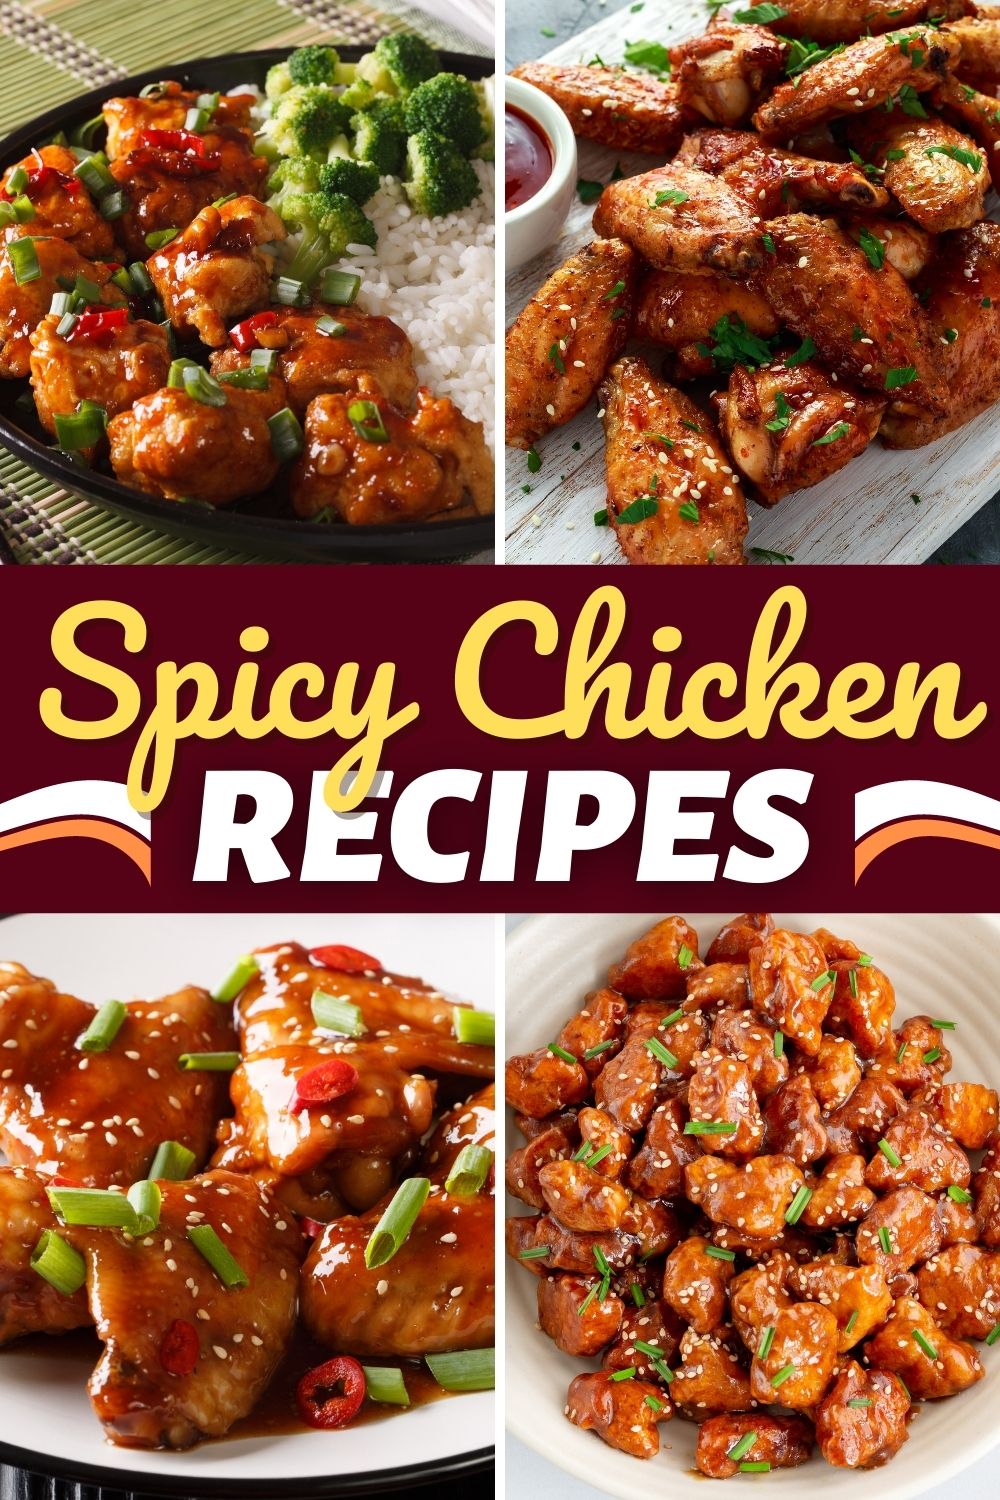 30 Easy Spicy Chicken Recipes and Ideas - Insanely Good